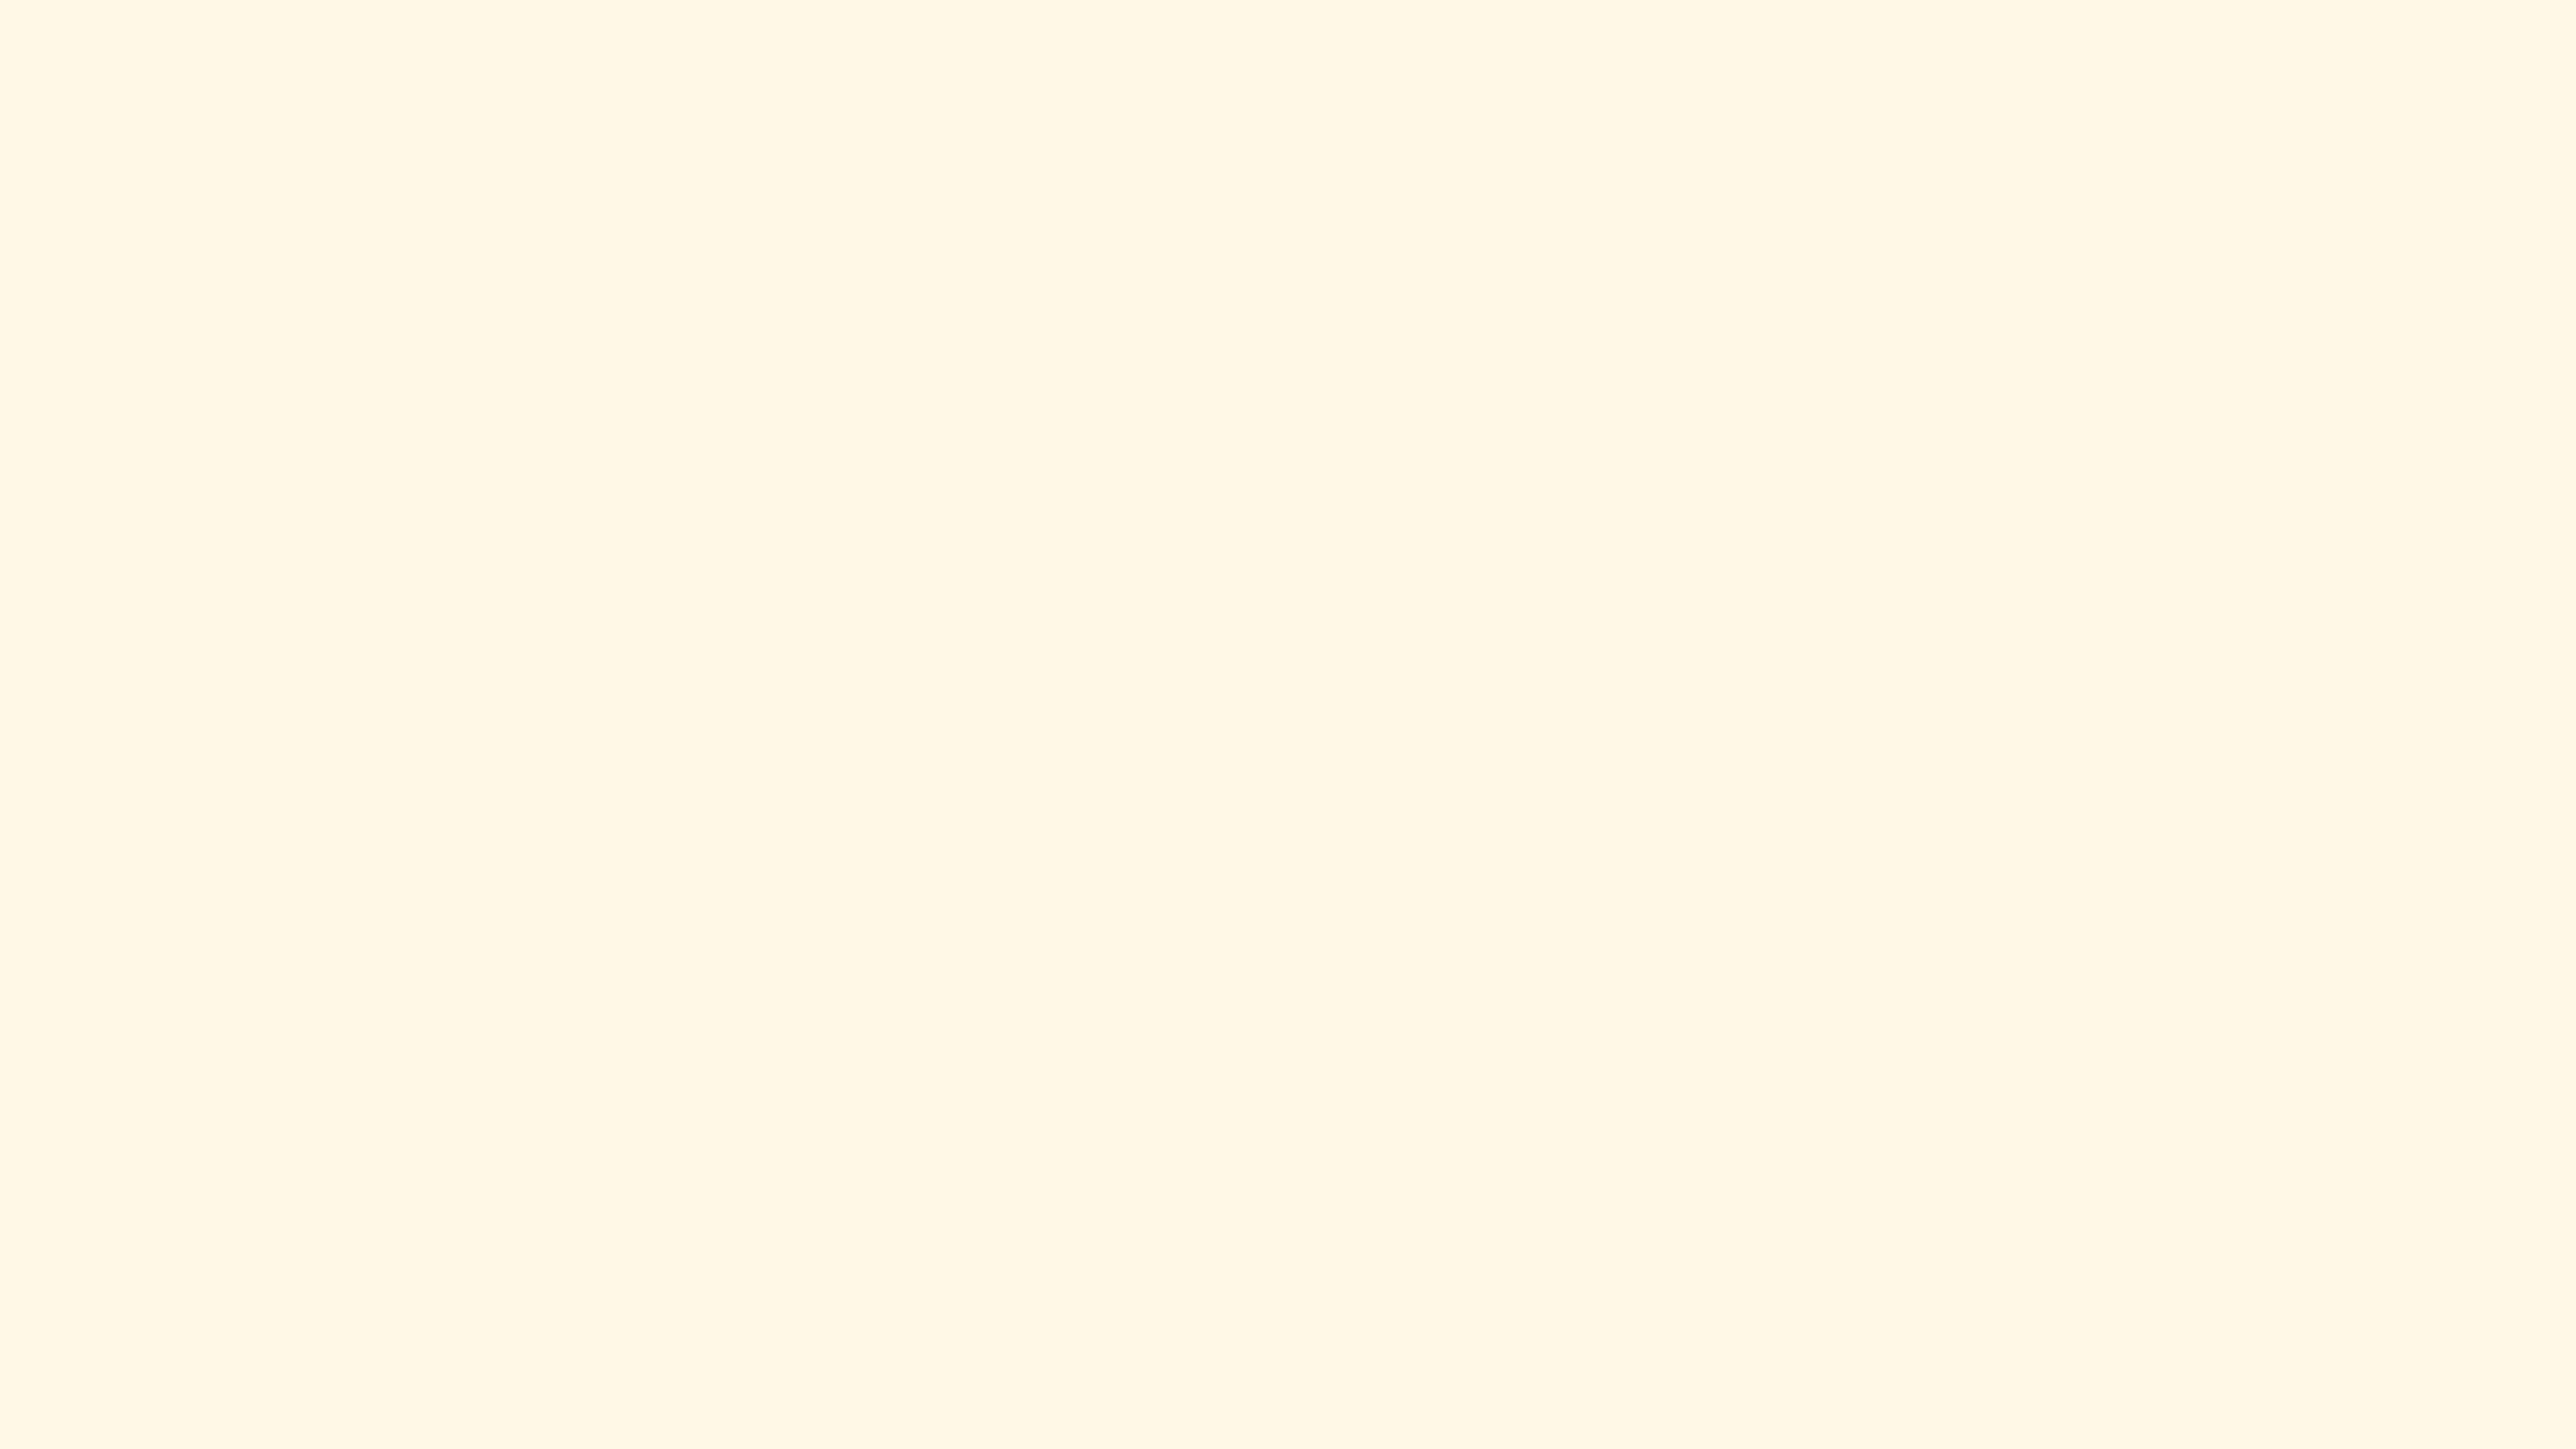 7680x4320 Cosmic Latte Solid Color Background